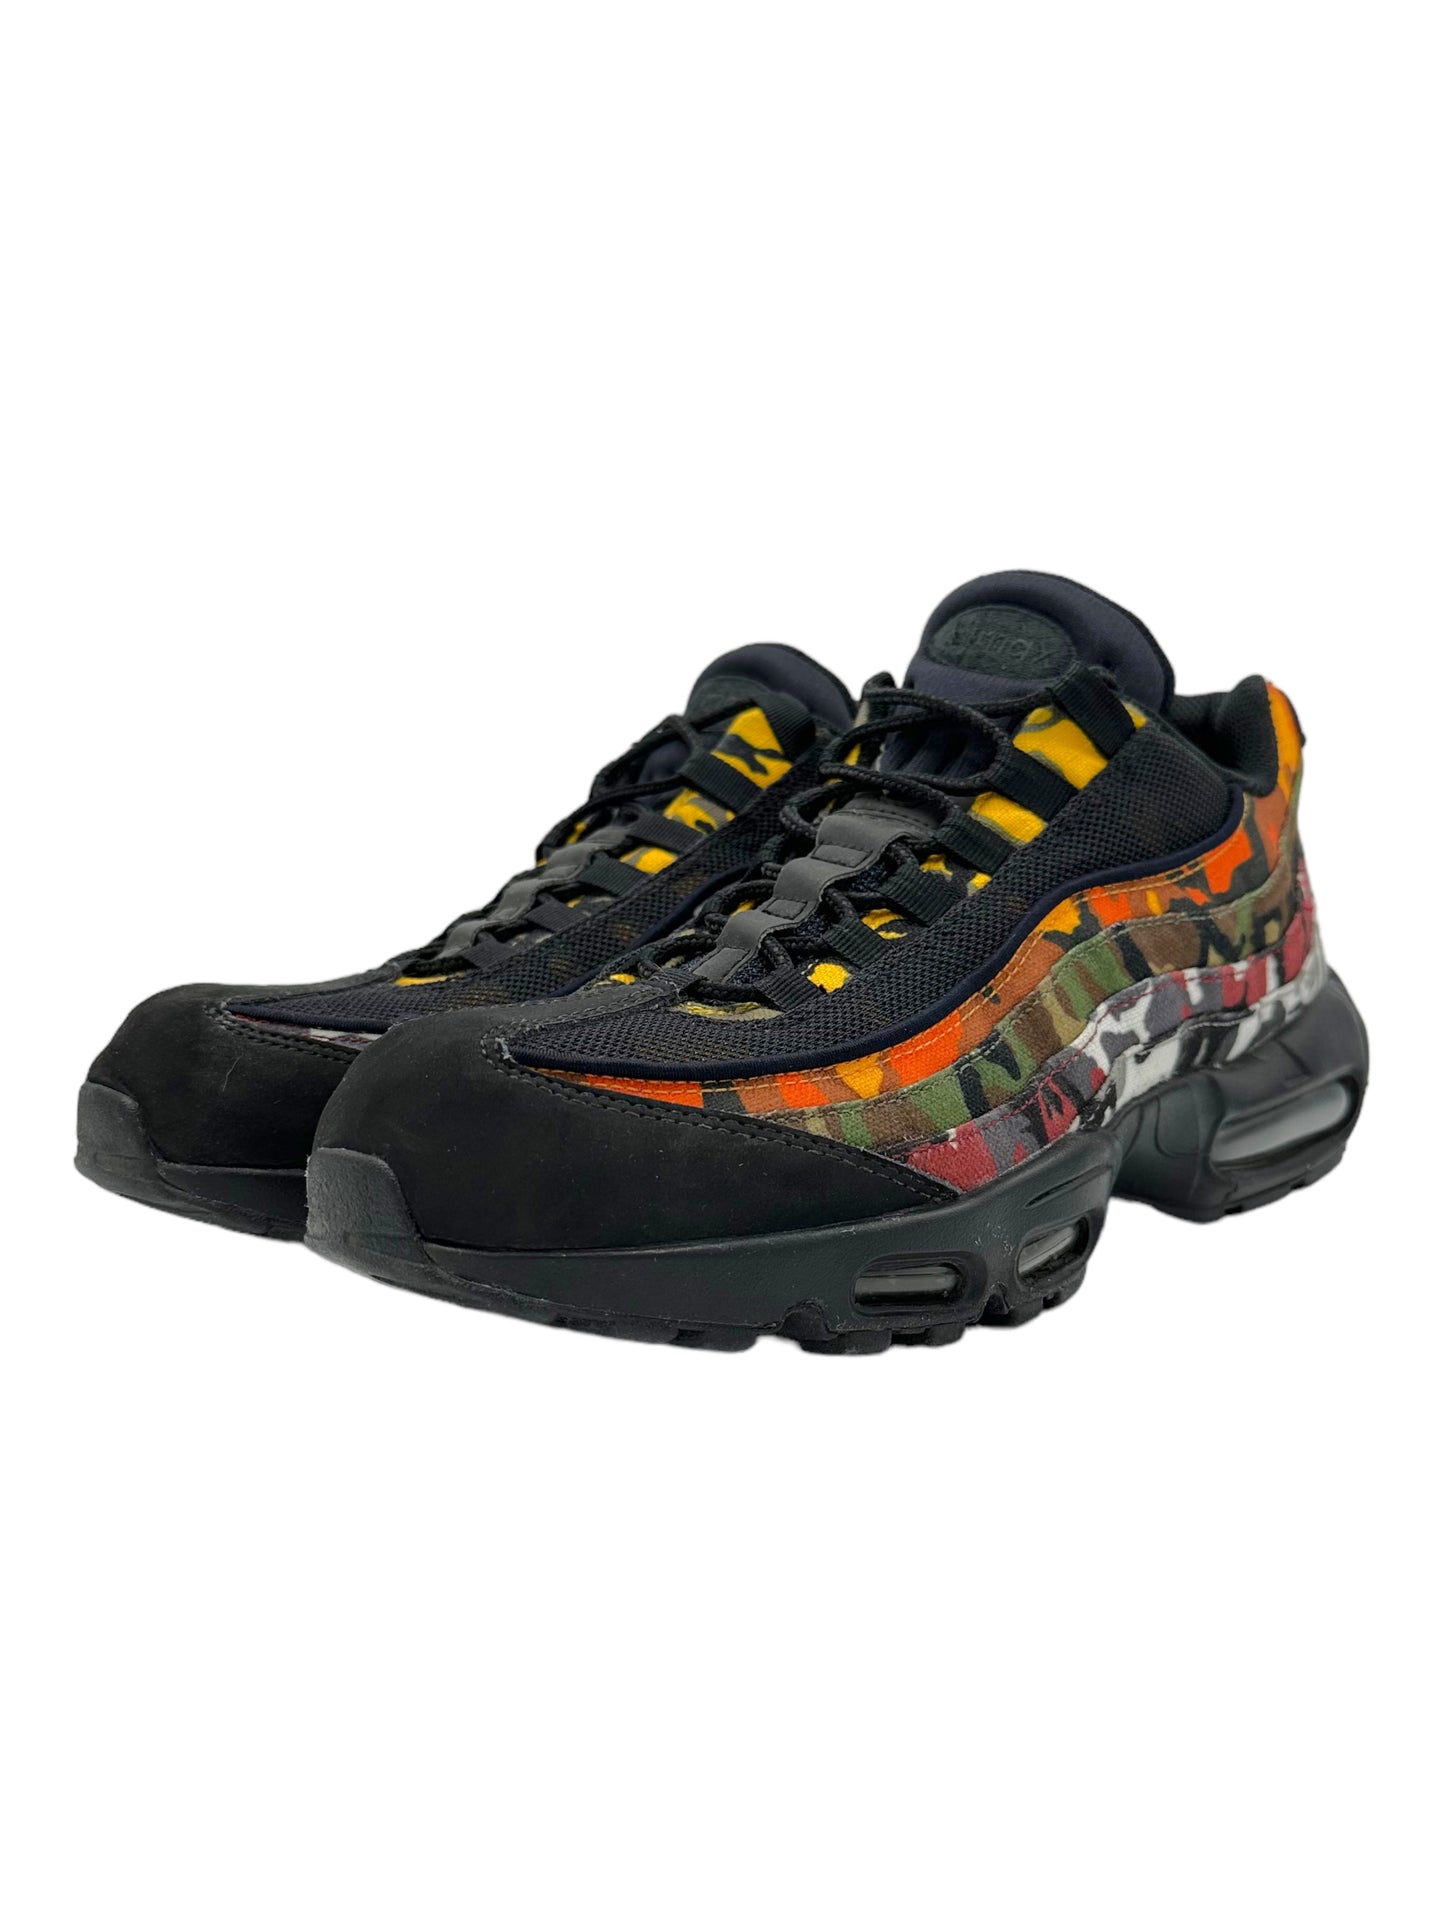 Nike Air Max 95 Black ERDL Party Sneakers - Genuine Design Luxury Consignment for Men. New & Pre-Owned Clothing, Shoes, & Accessories. Calgary, Canada